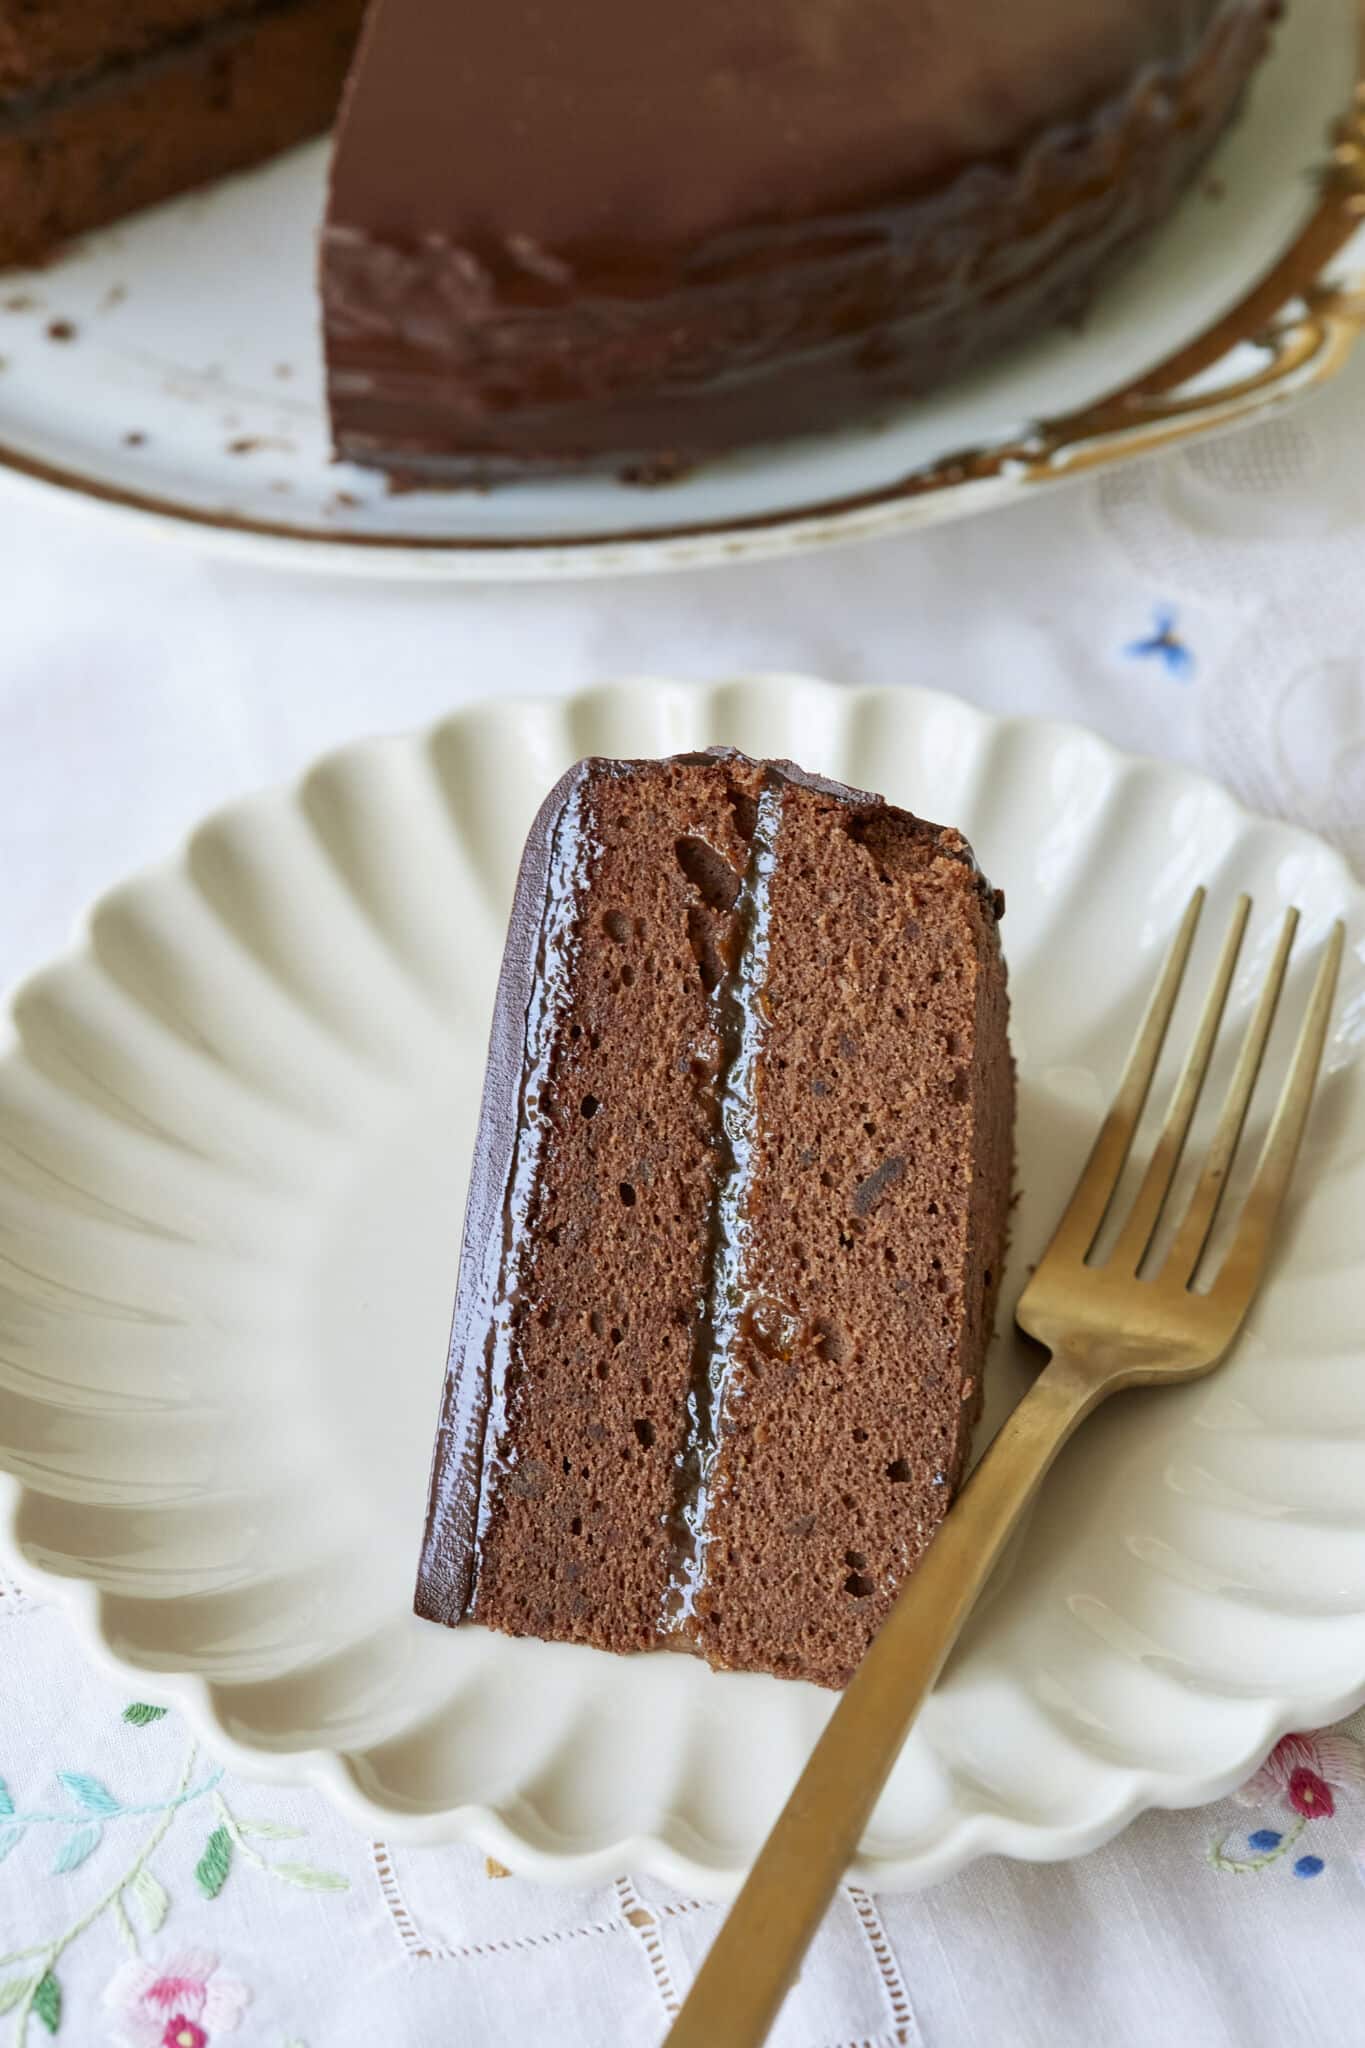 Classic Austrian Sacher Torte is placed on a round golden rim platter. A case-up shot at the slice on a white dessert plate shows the moist, fine crumb of the chocolate sponge cake and the silky smooth, shinny glaze. 